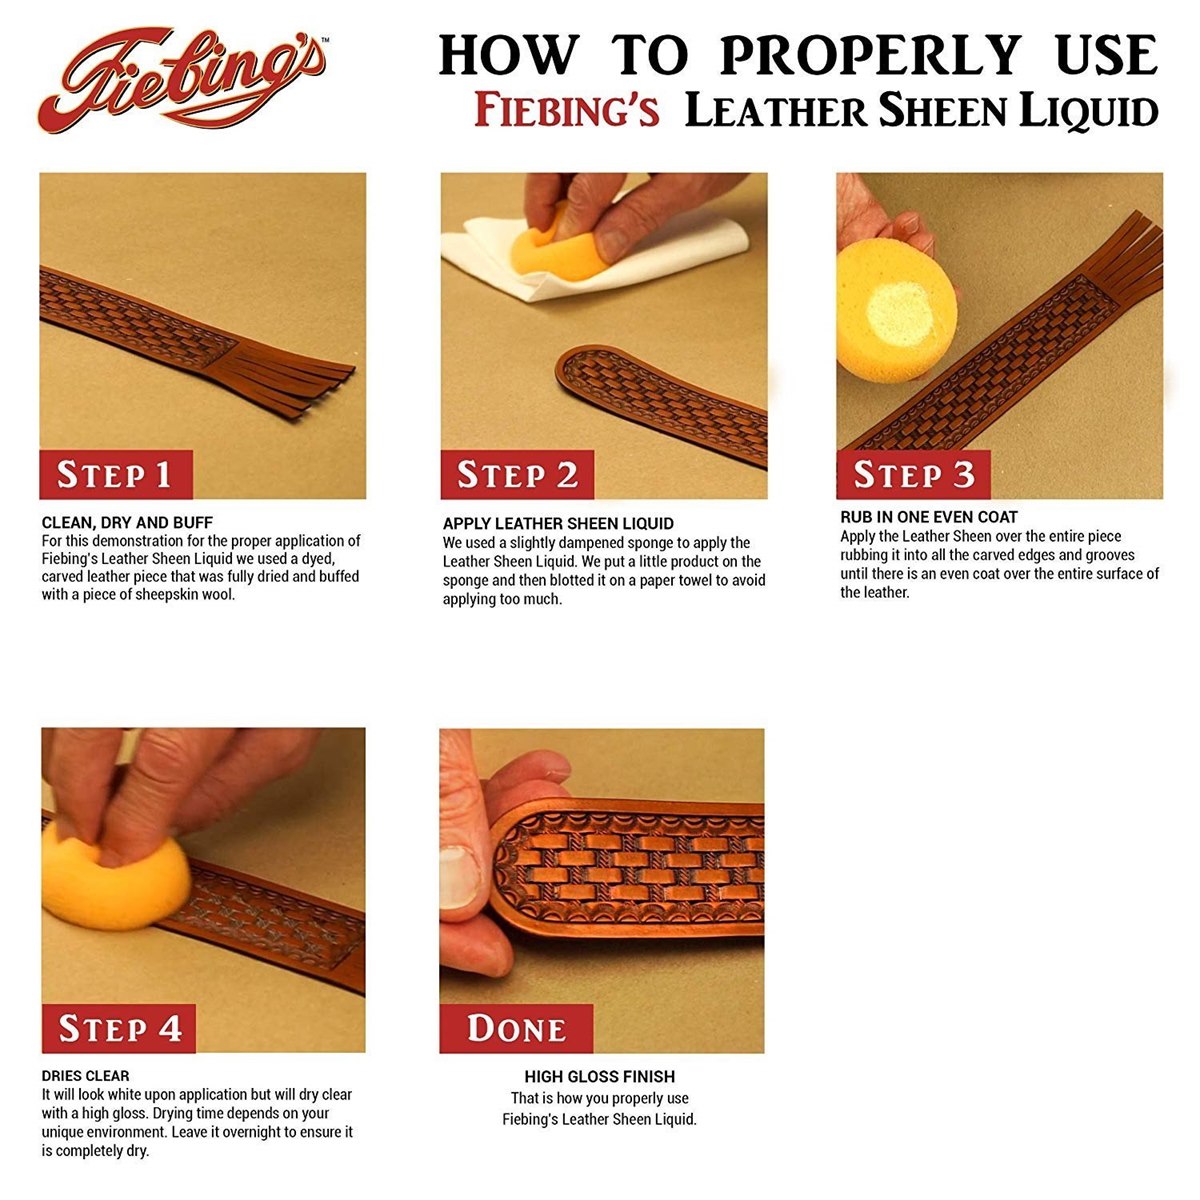 How to apply Fiebings Leather Sheen